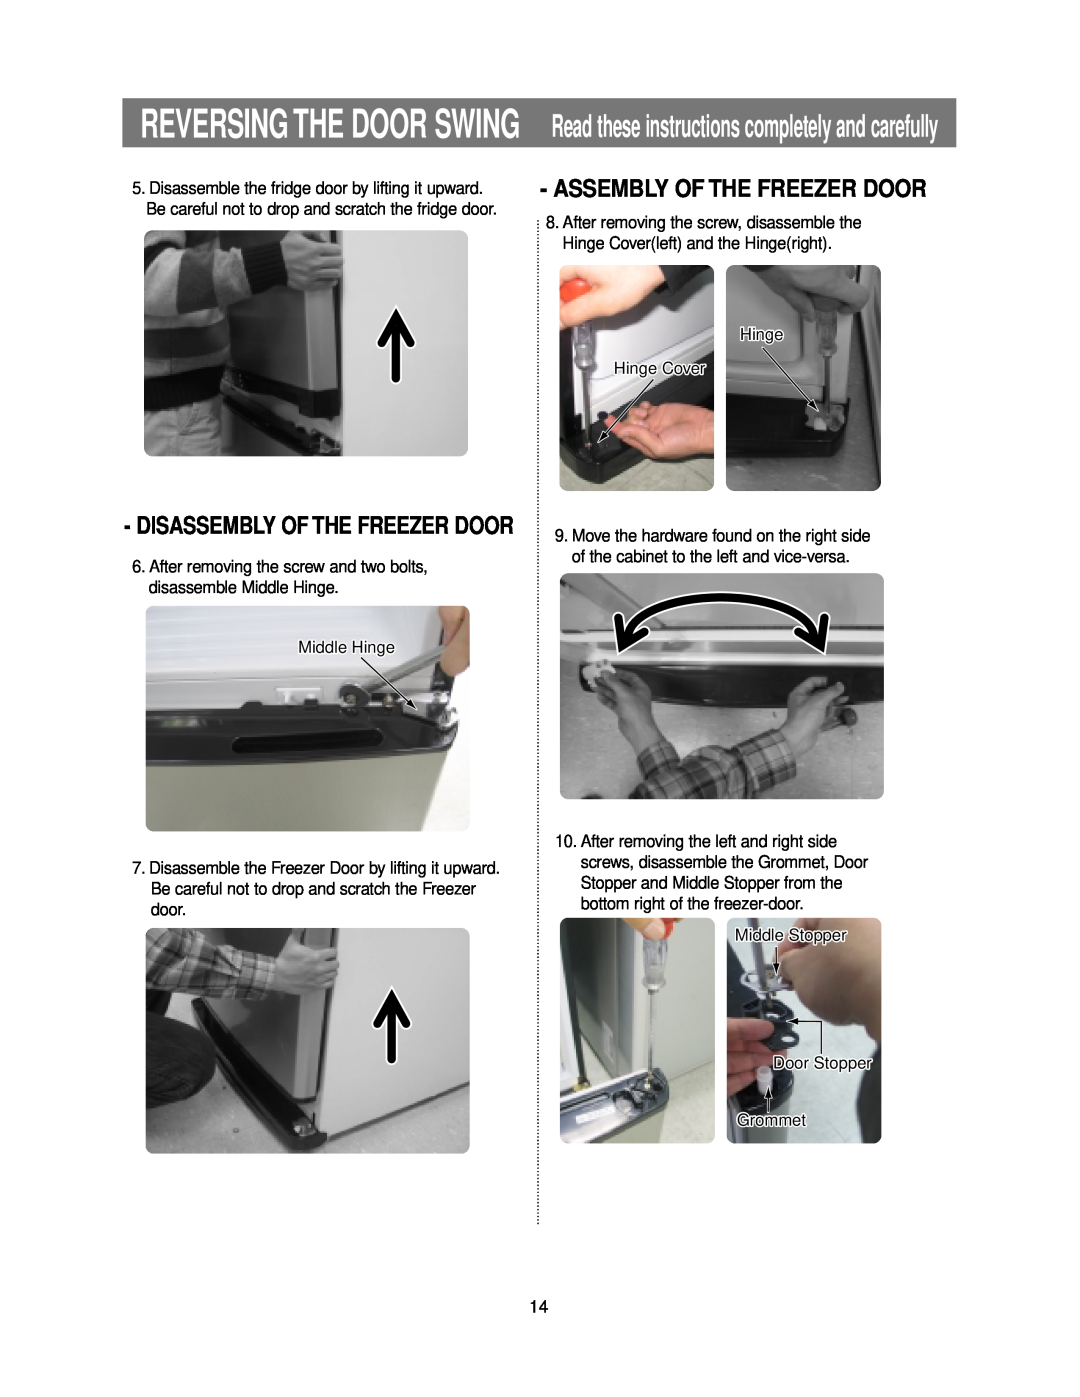 Samsung RB193KASB owner manual Assembly Of The Freezer Door, Disassembly Of The Freezer Door, Reversing The Door Swing 